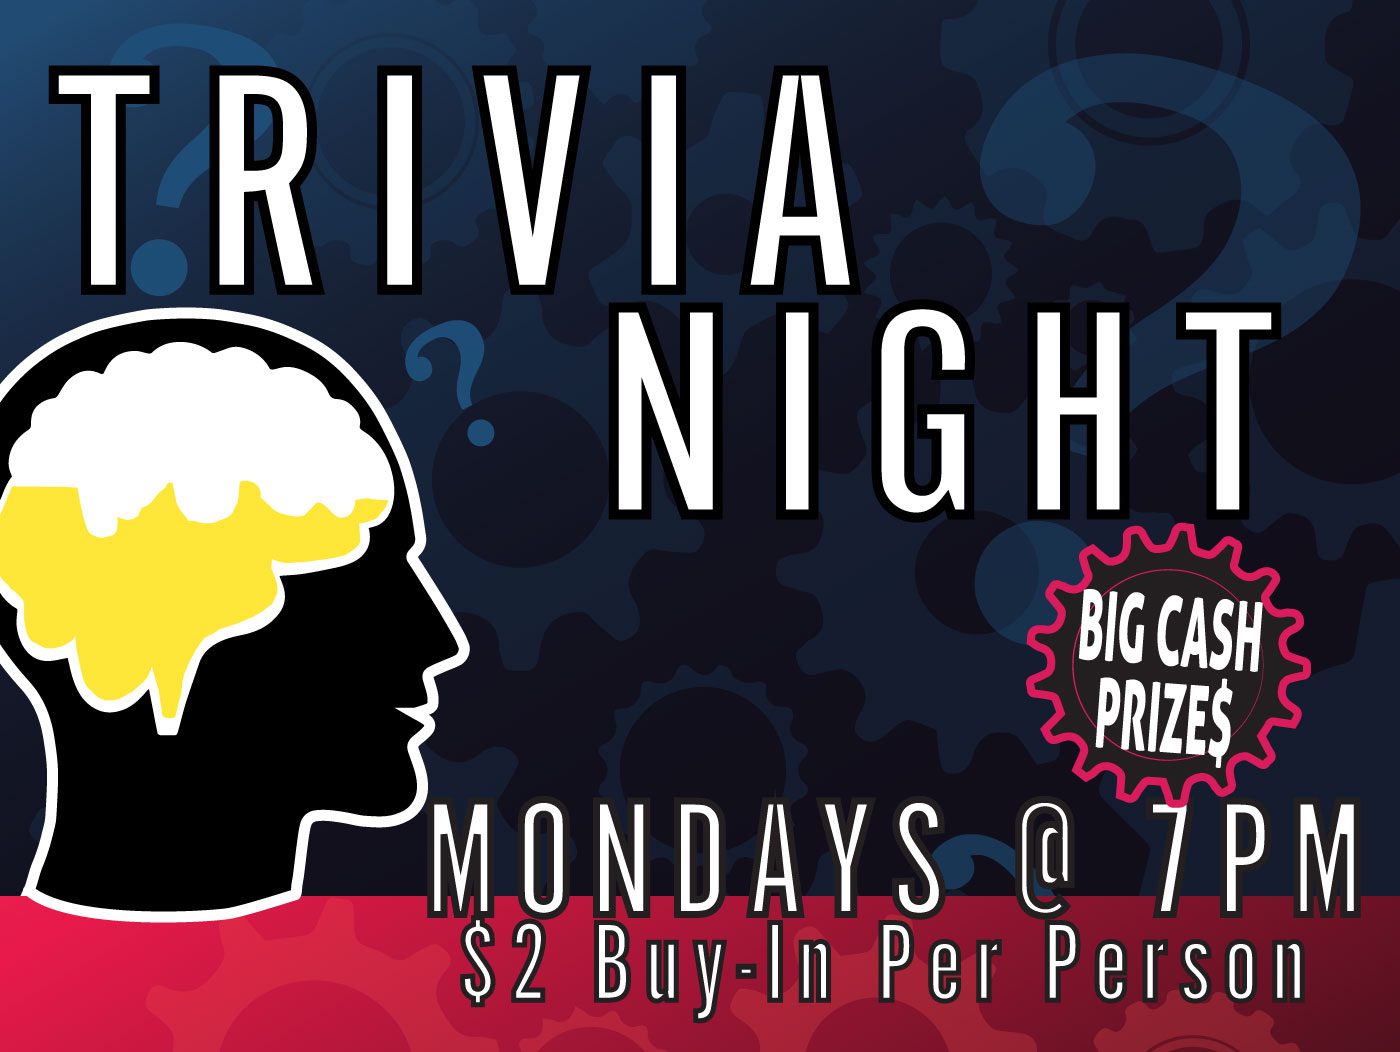 Motorworks Brewing presents Trivia Night every Monday @ 7:00 pm EST - $2 Buy-in per person